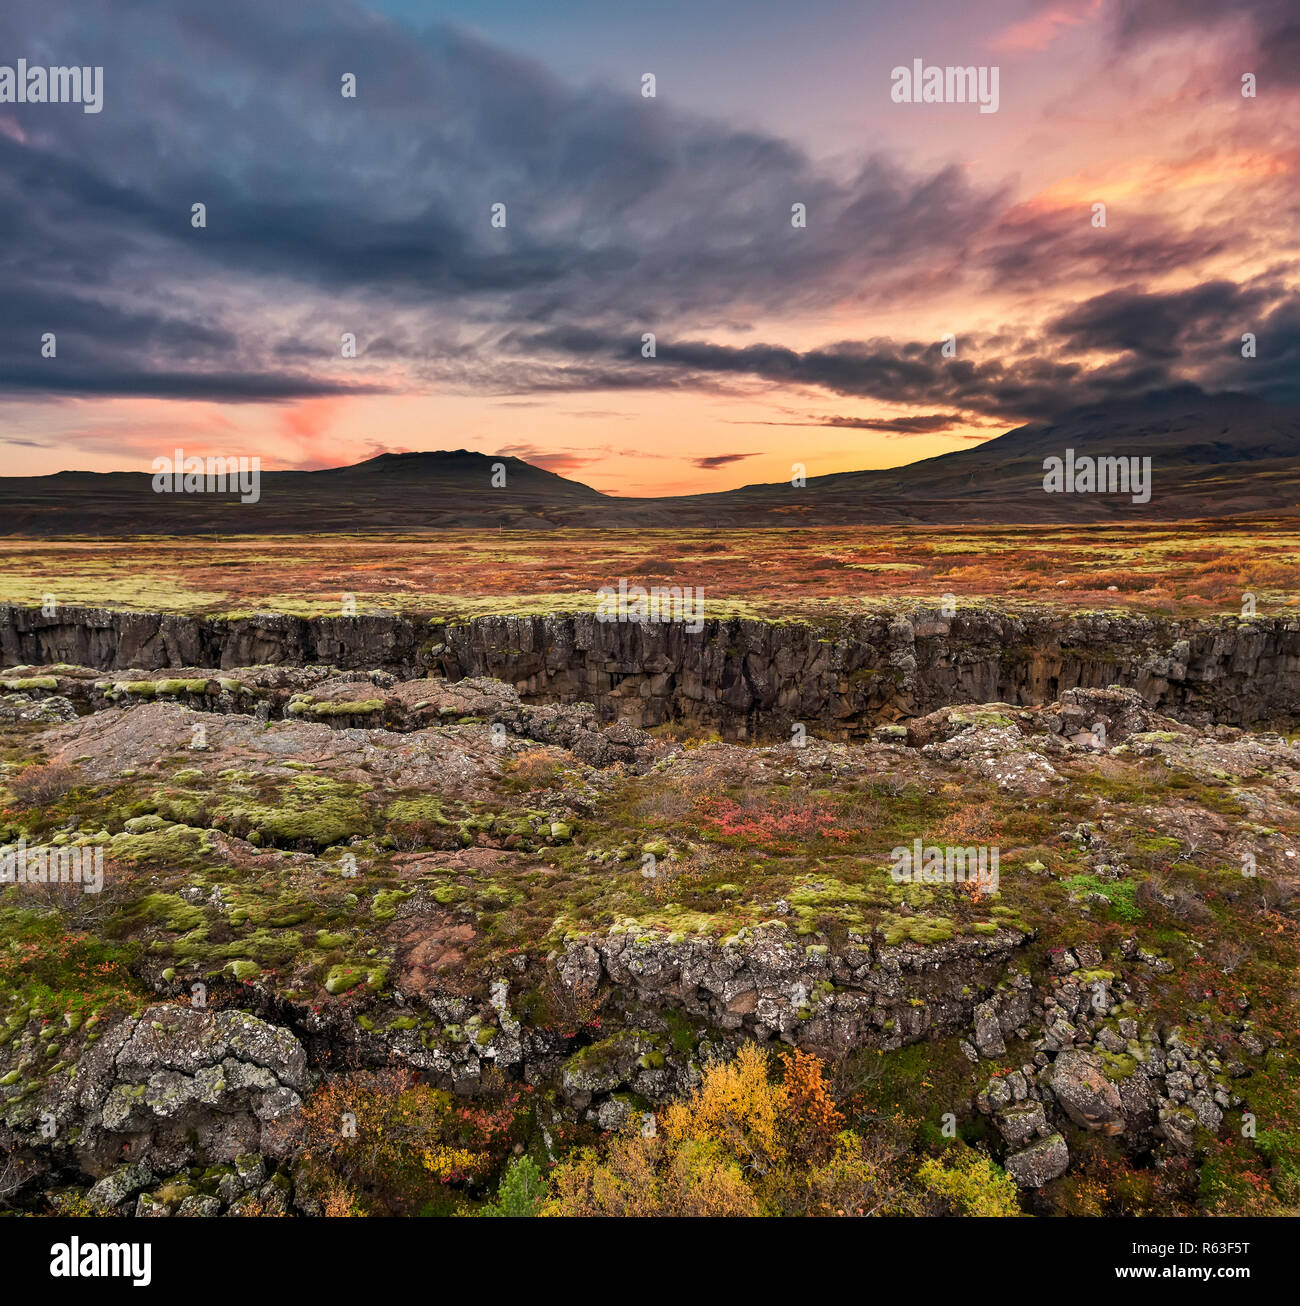 Thingvellir National Park, Iceland. This image is shot using a drone. Stock Photo